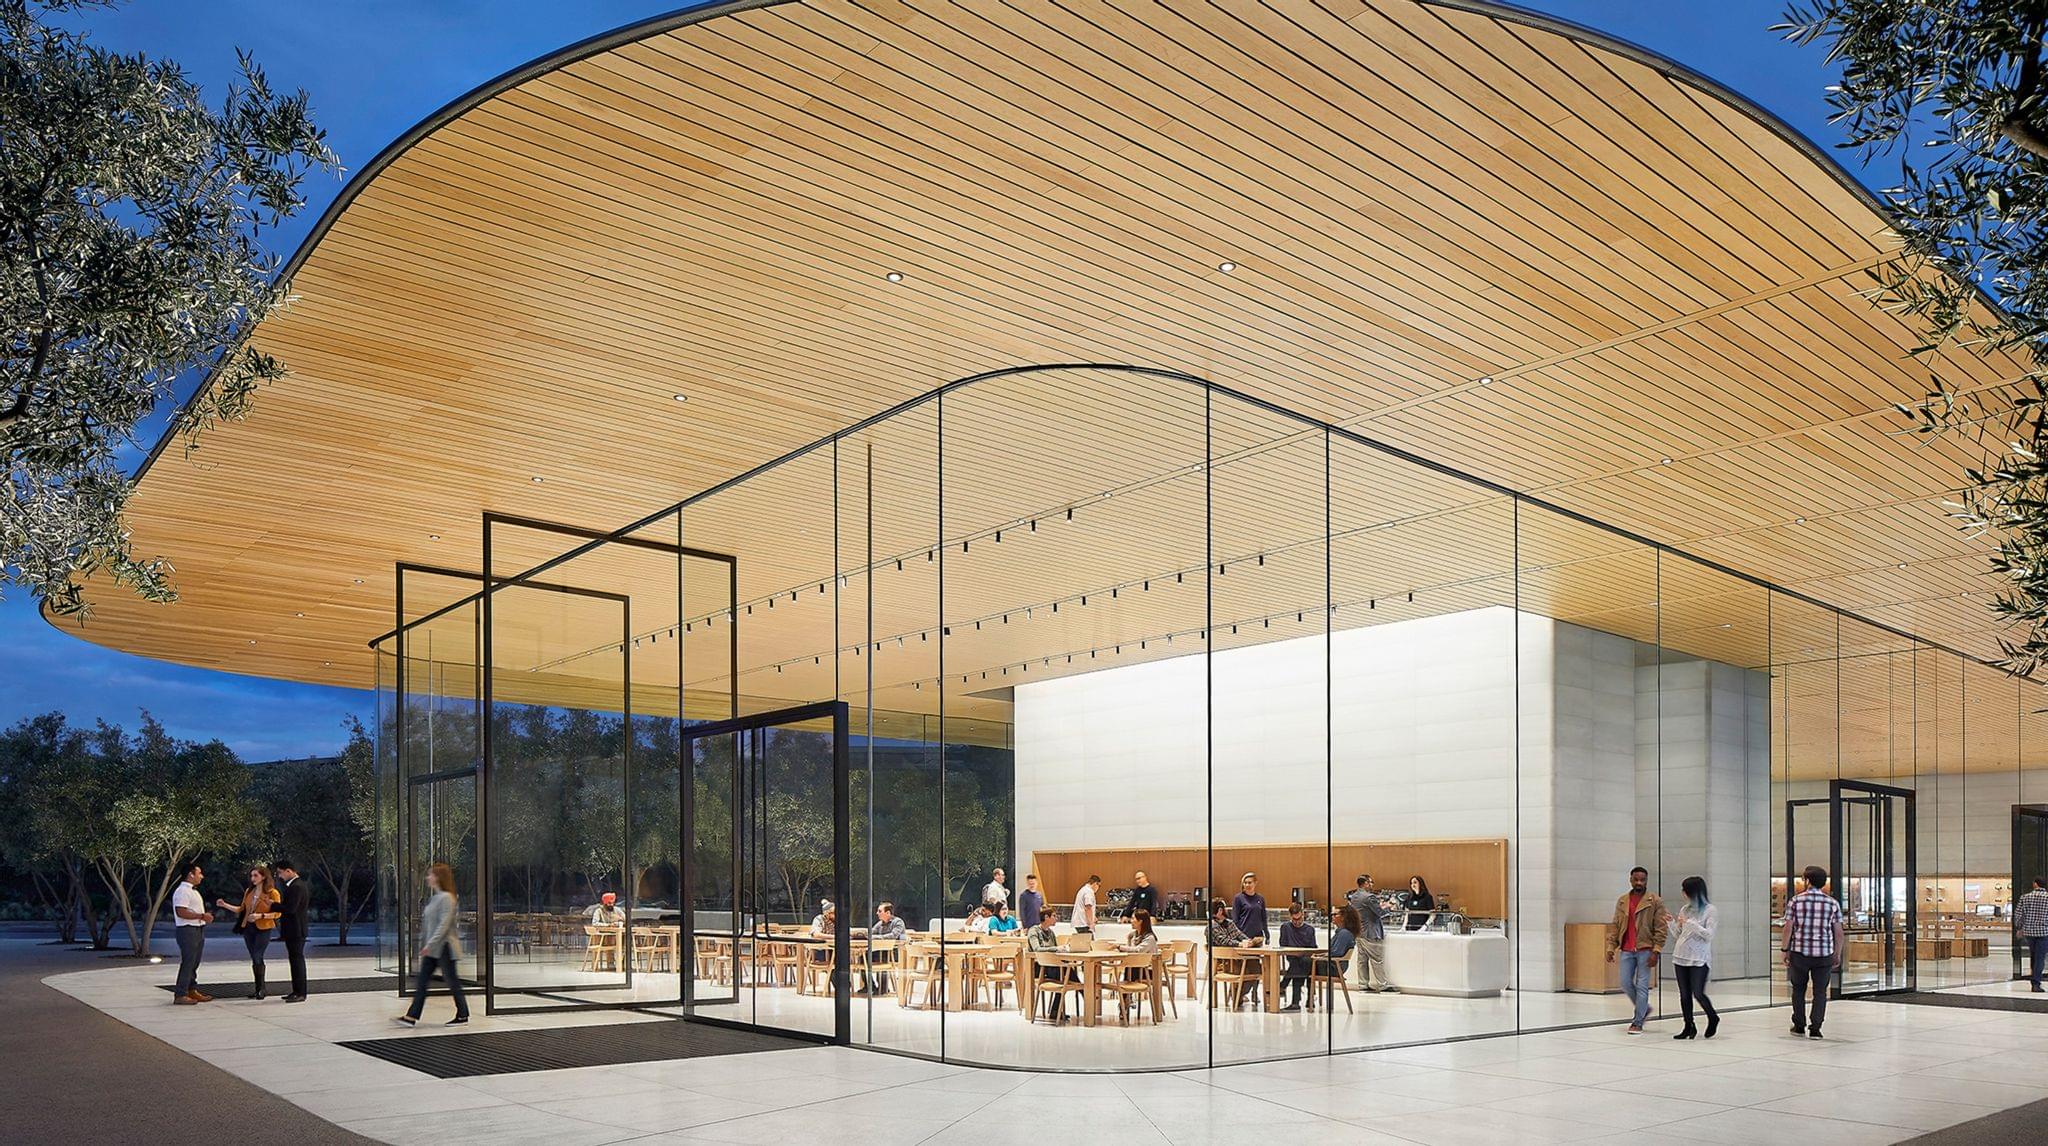 The Visitor's Center worked well as a media gathering spot, but it's not big enough for everyone. Source: Apple.